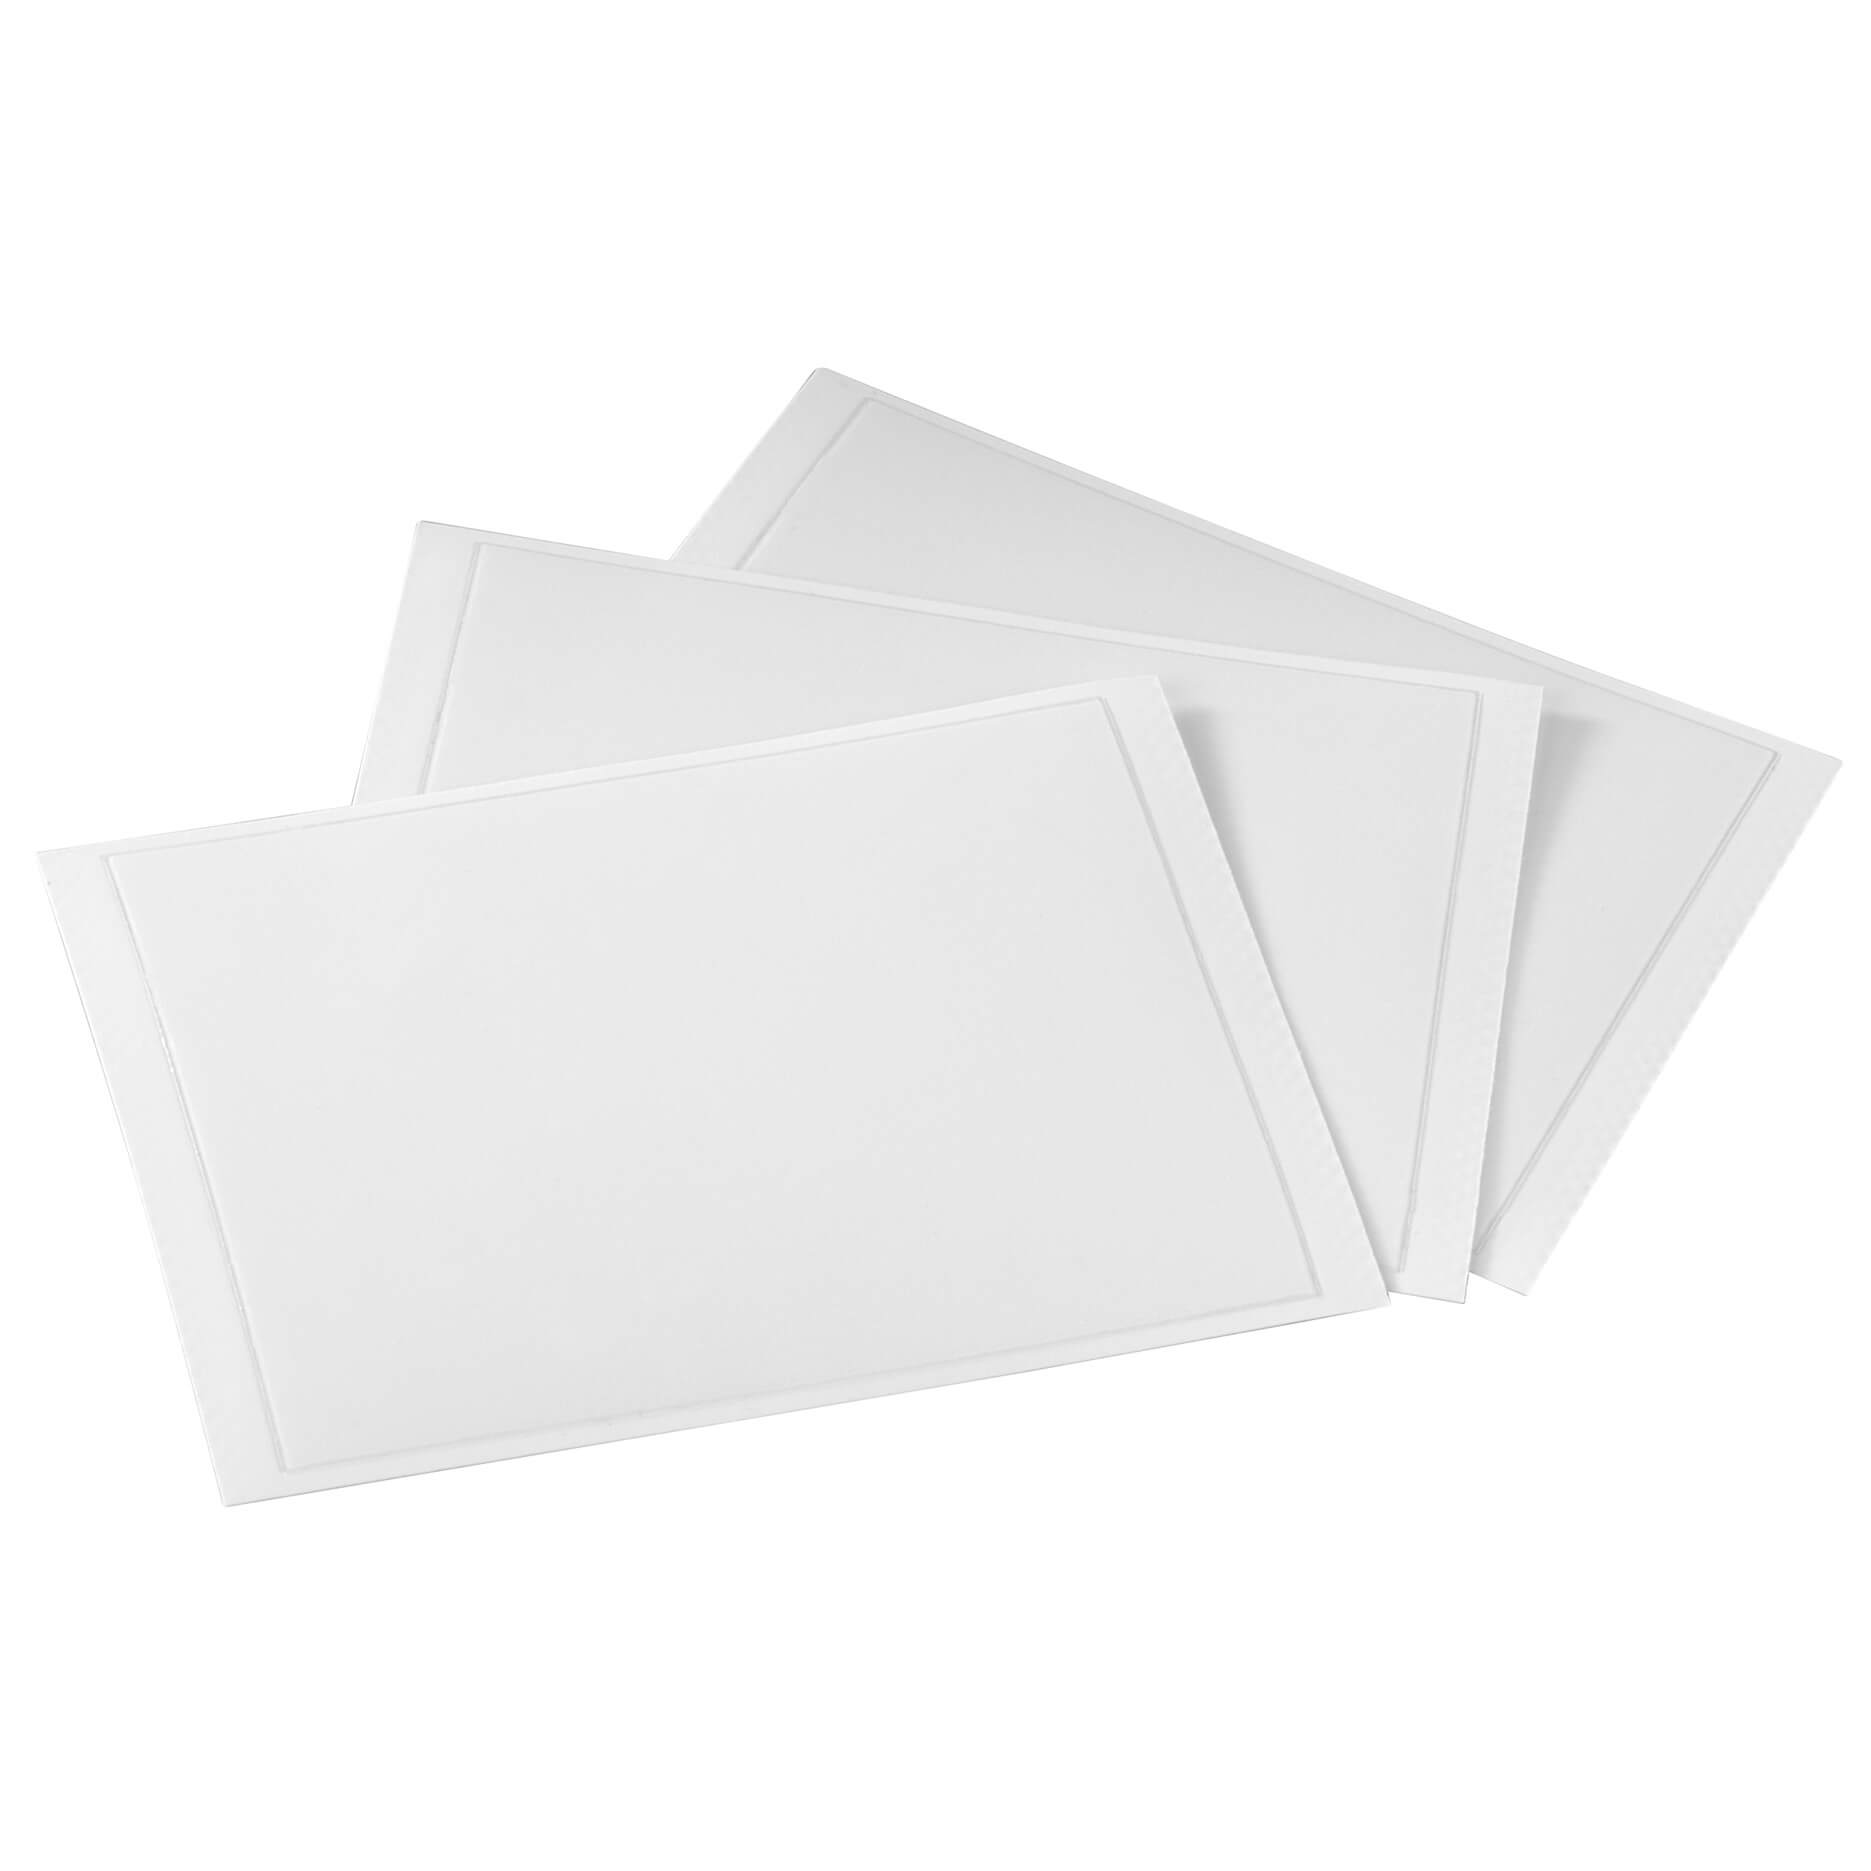 Screen Protector for 5.5 x 4. 1 cm (2.7), 3 pieces